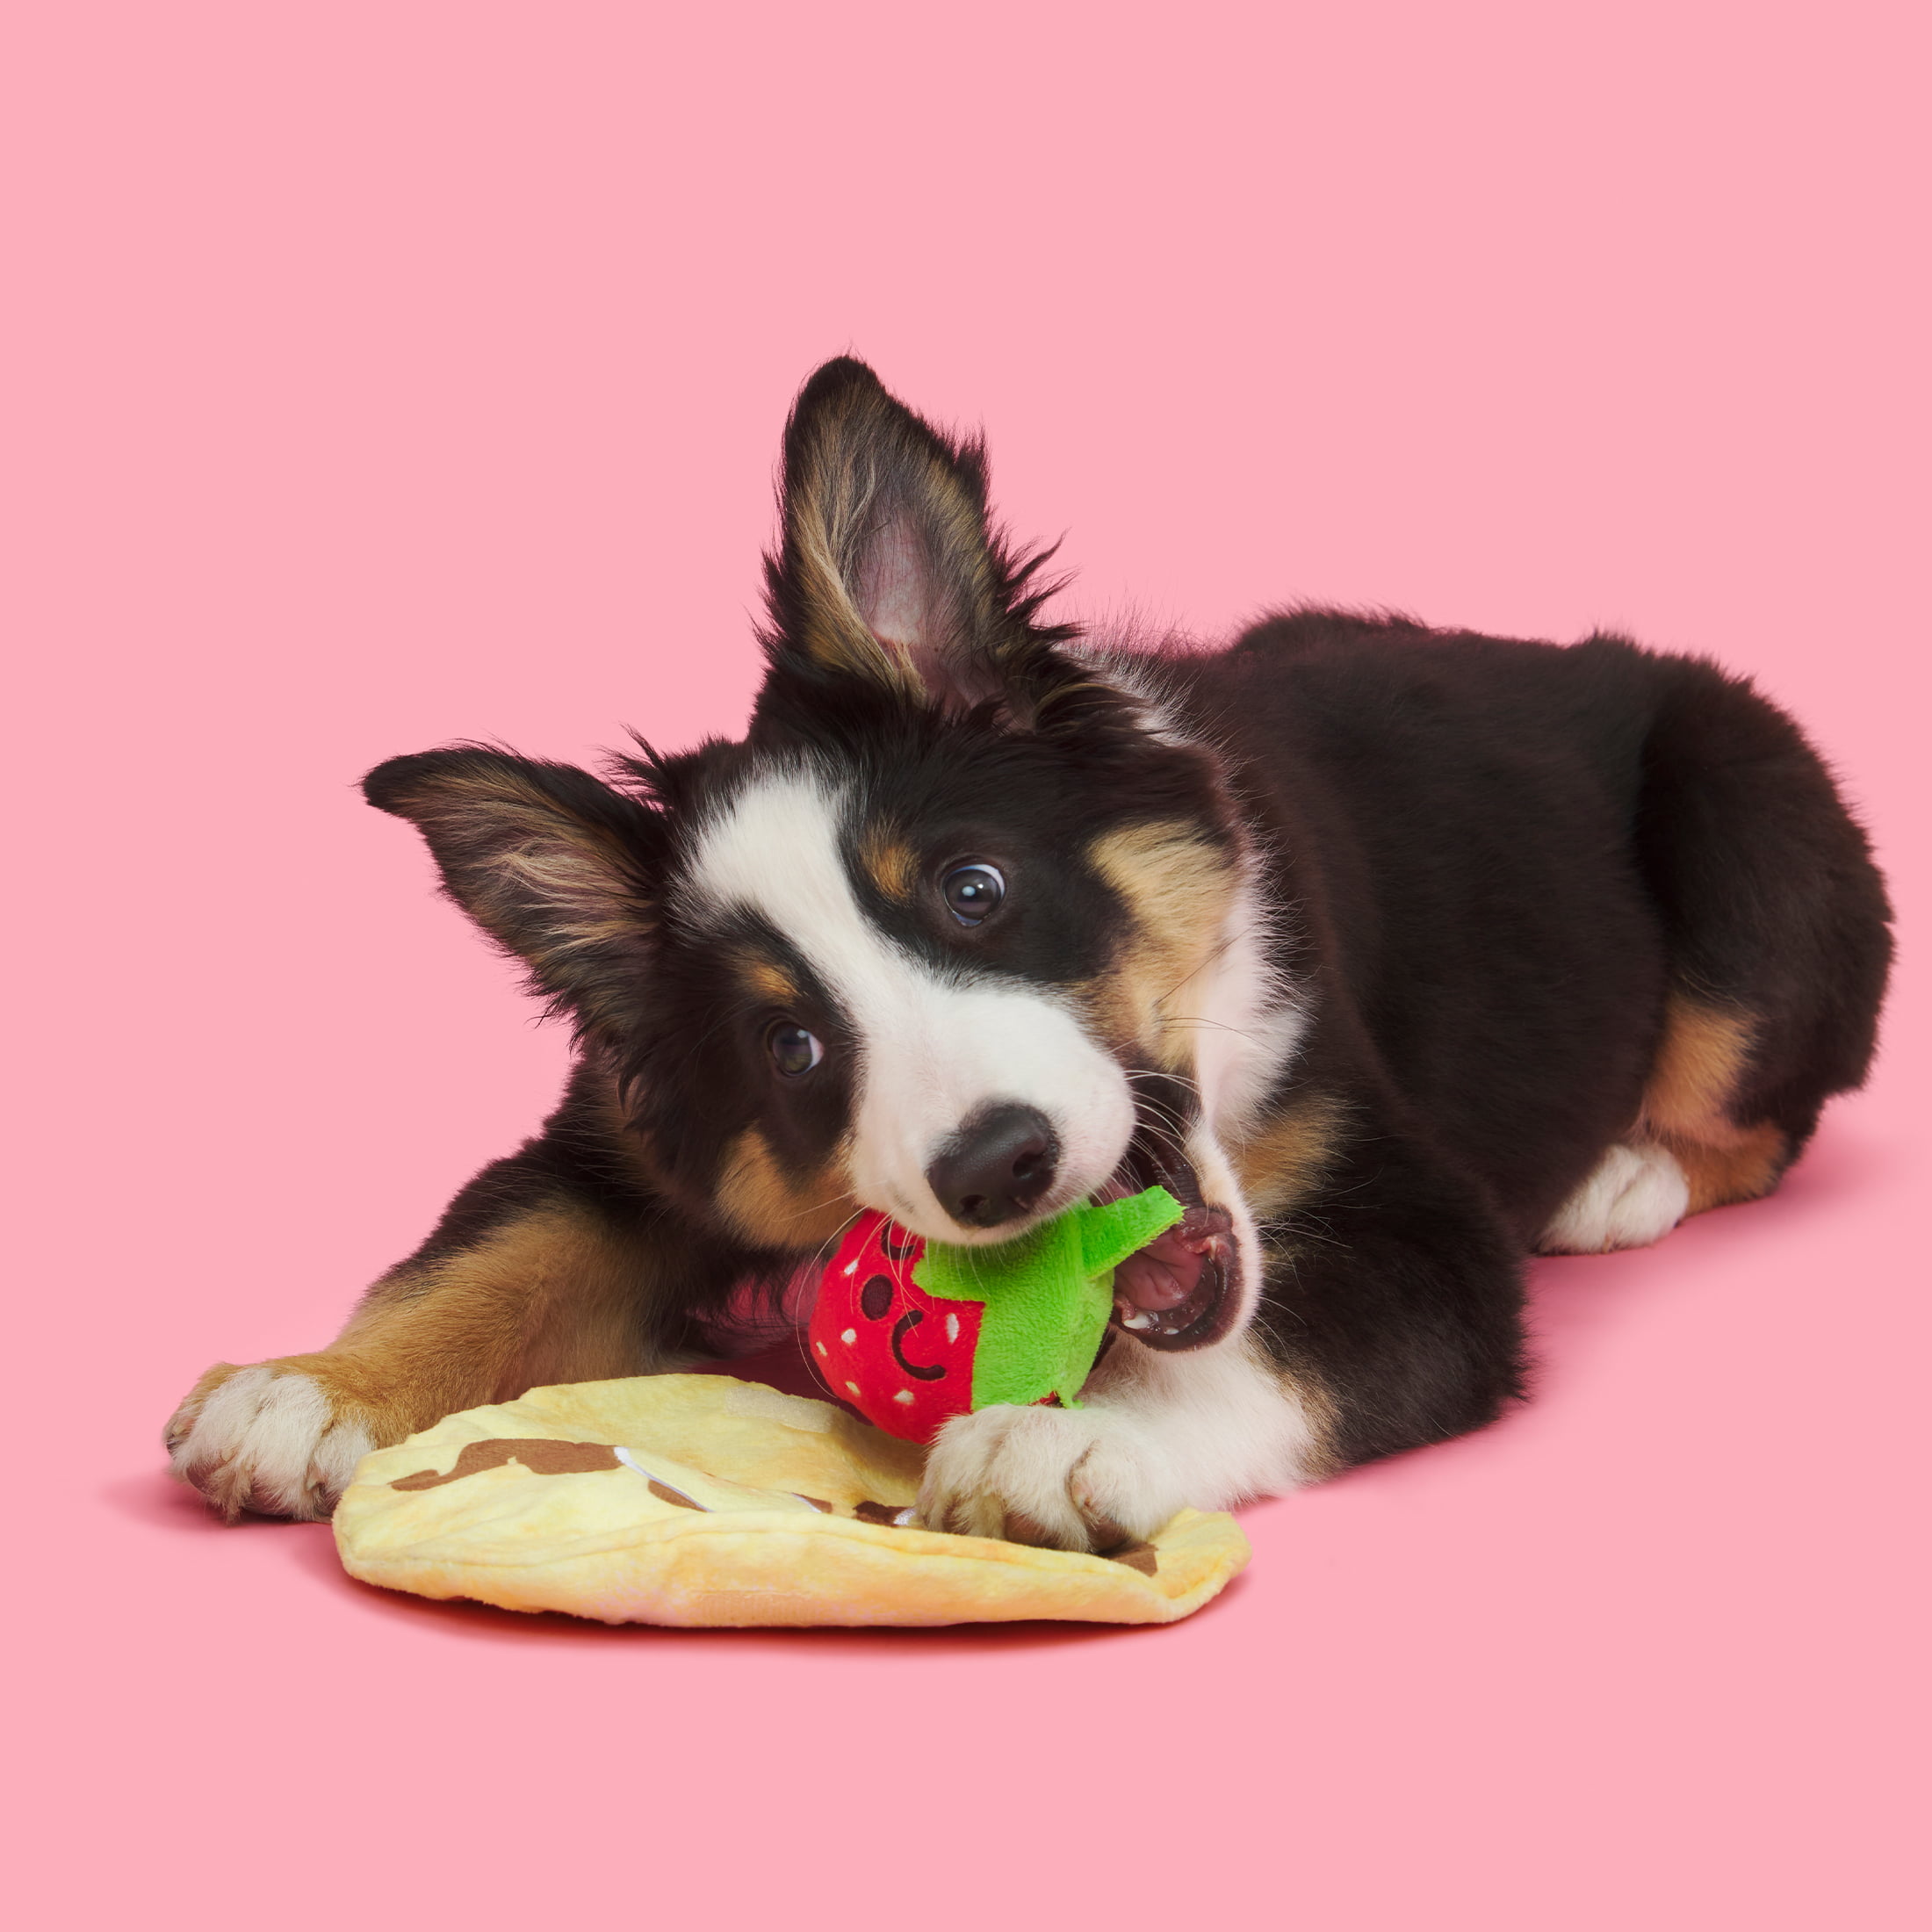 P.L.A.Y. Barking Brunch Pup's Pastry Dog Toy